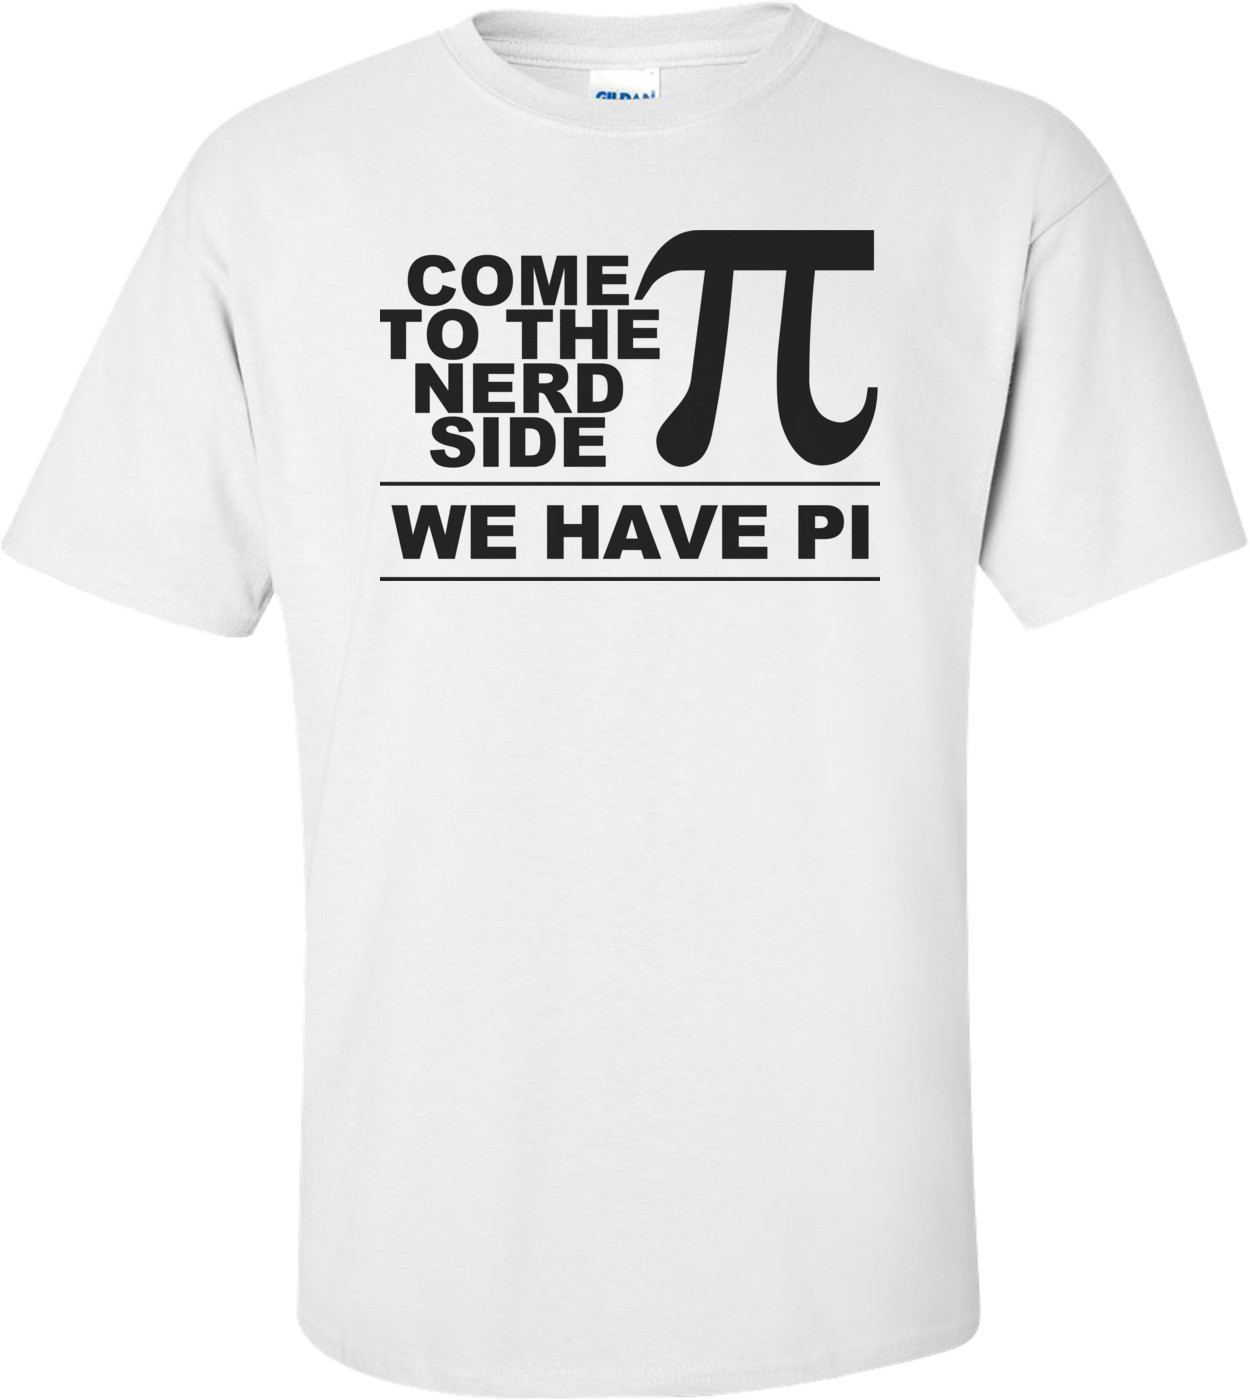 Come To The Nerd Side, We Have Pi